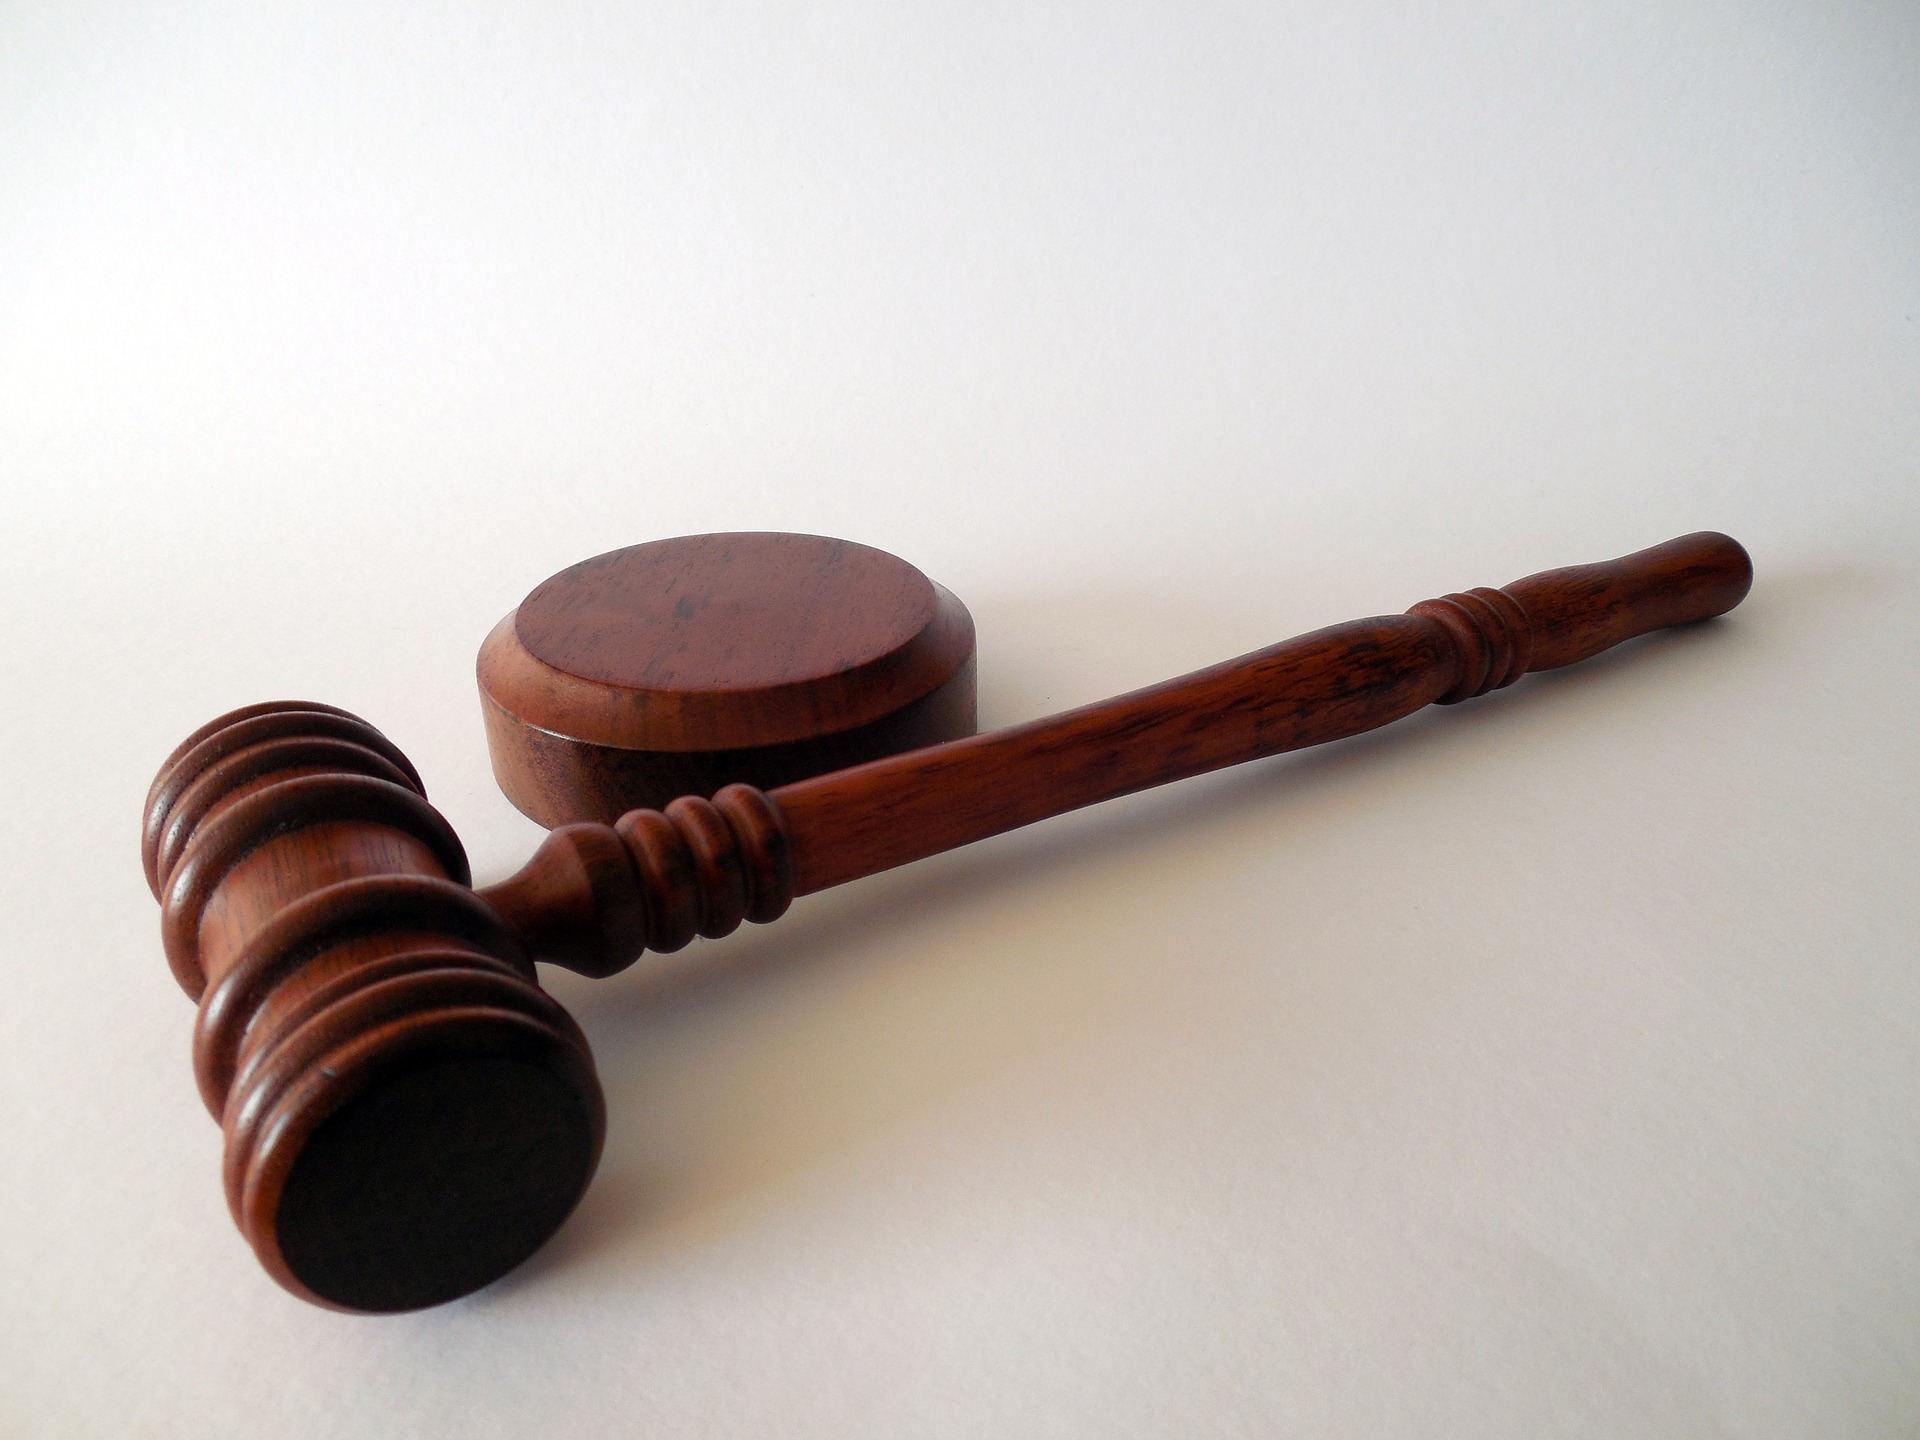 A wooden gavel resting on a white surface, angled to show its head and handle, typically used by judges or at auctions to address acts such as domestic violence.